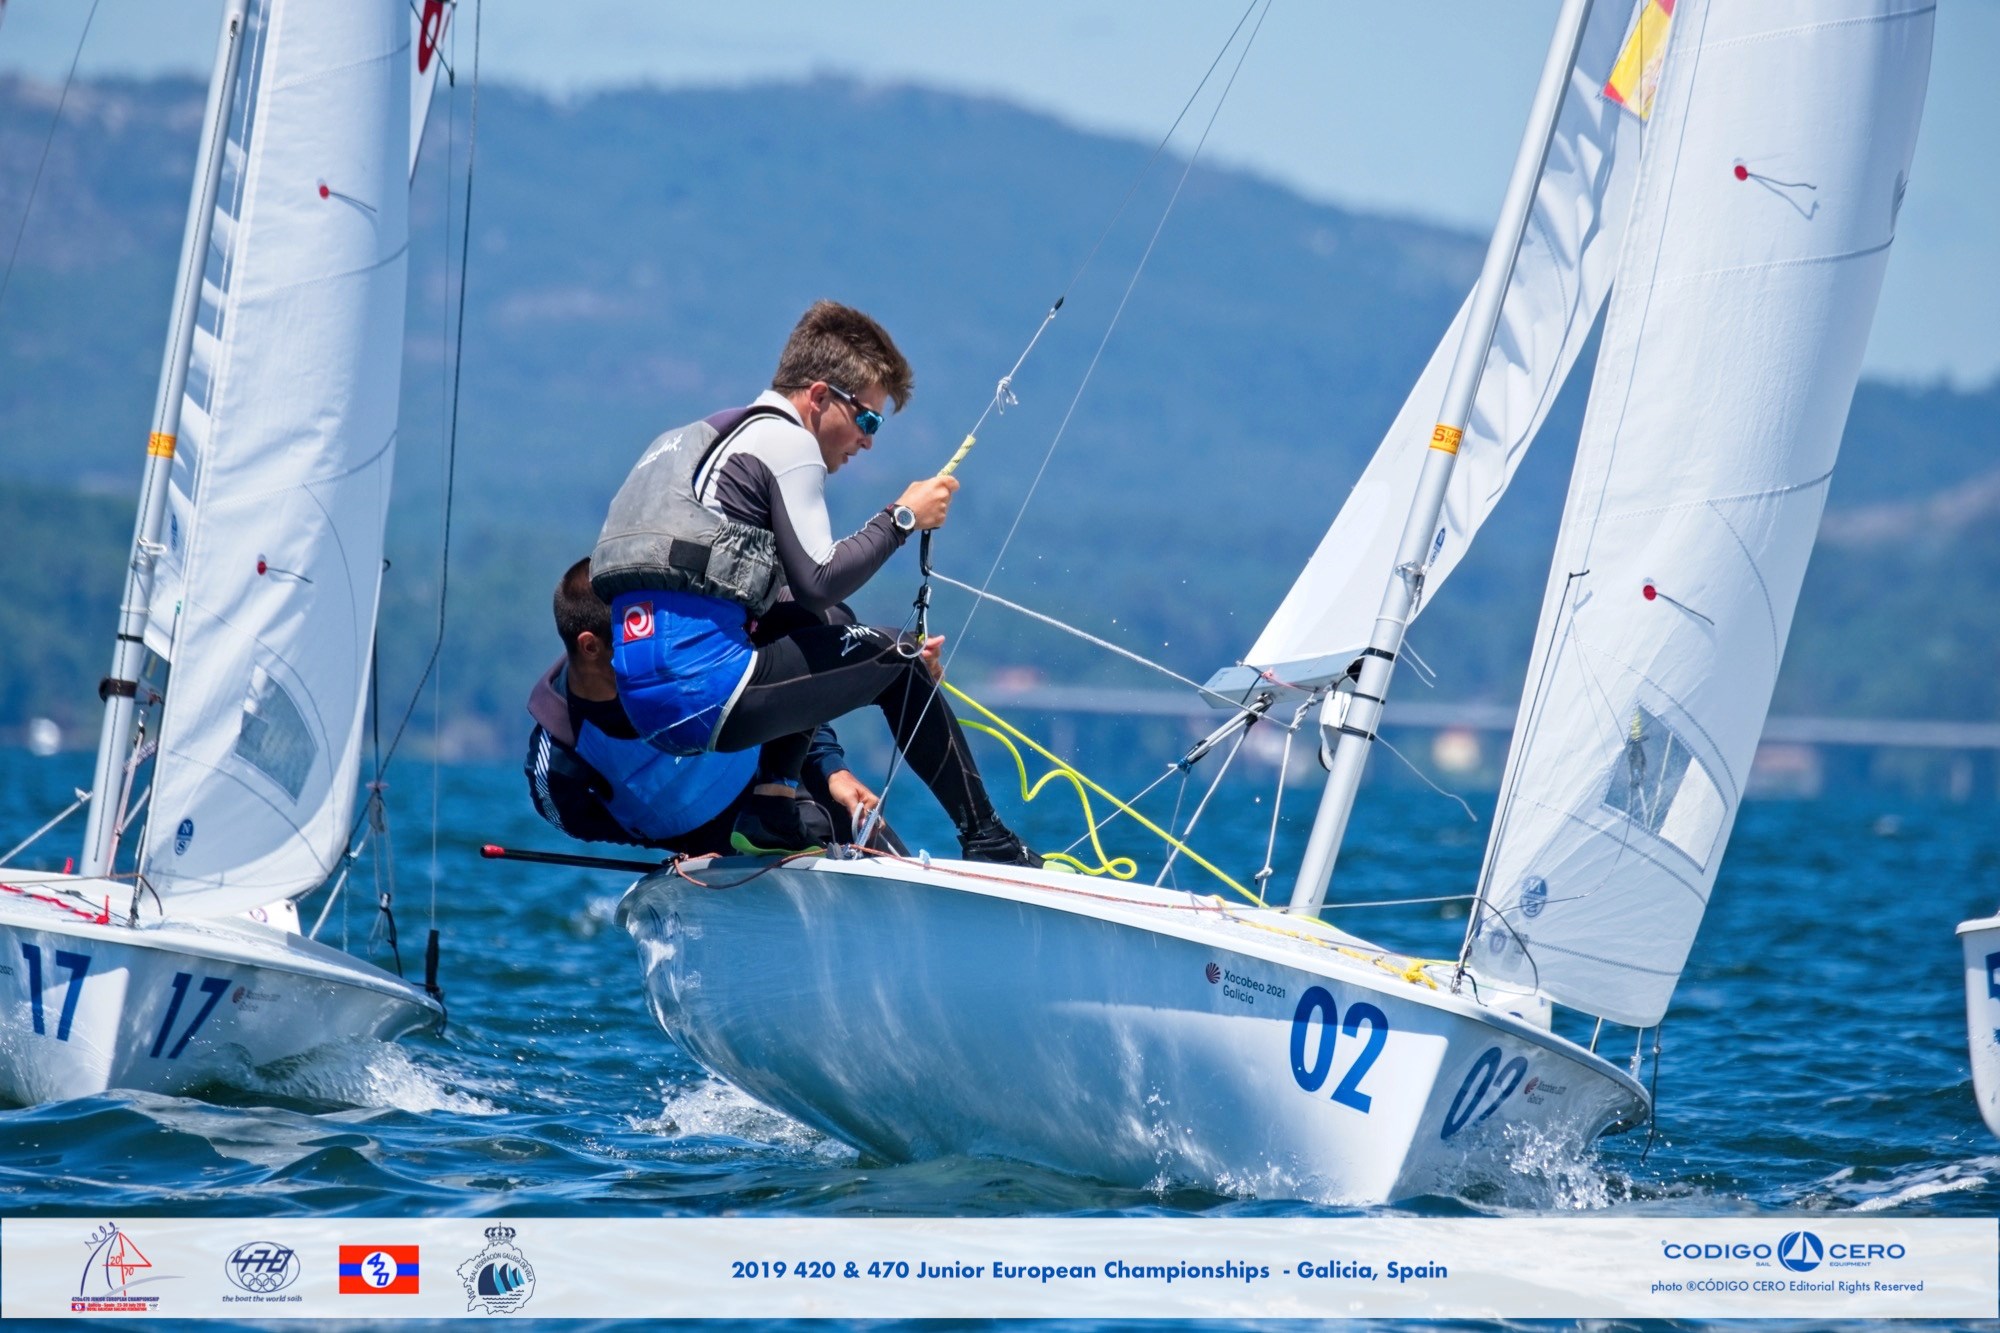 Jacobo Garcia/Antoni Ripoll (ESP) in 3rd overall on day 4